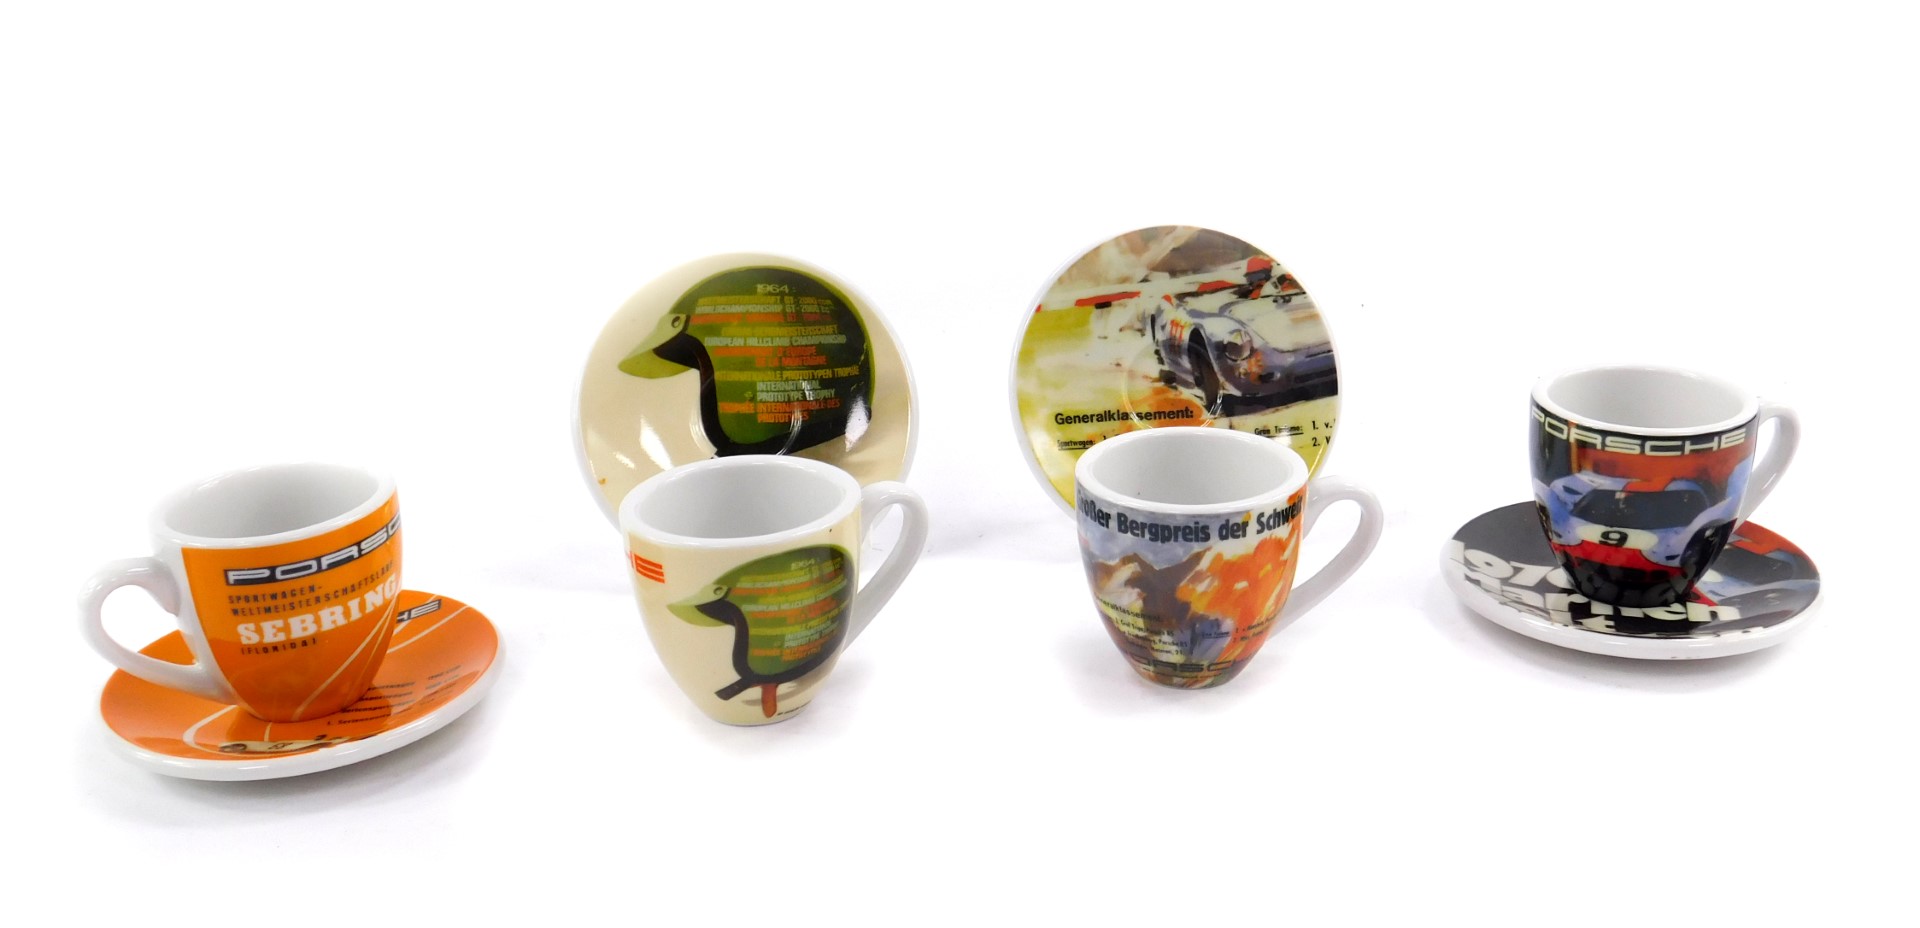 Four German porcelain demi tasse coffee cups and saucers for Porsche, limited edition number 0441,